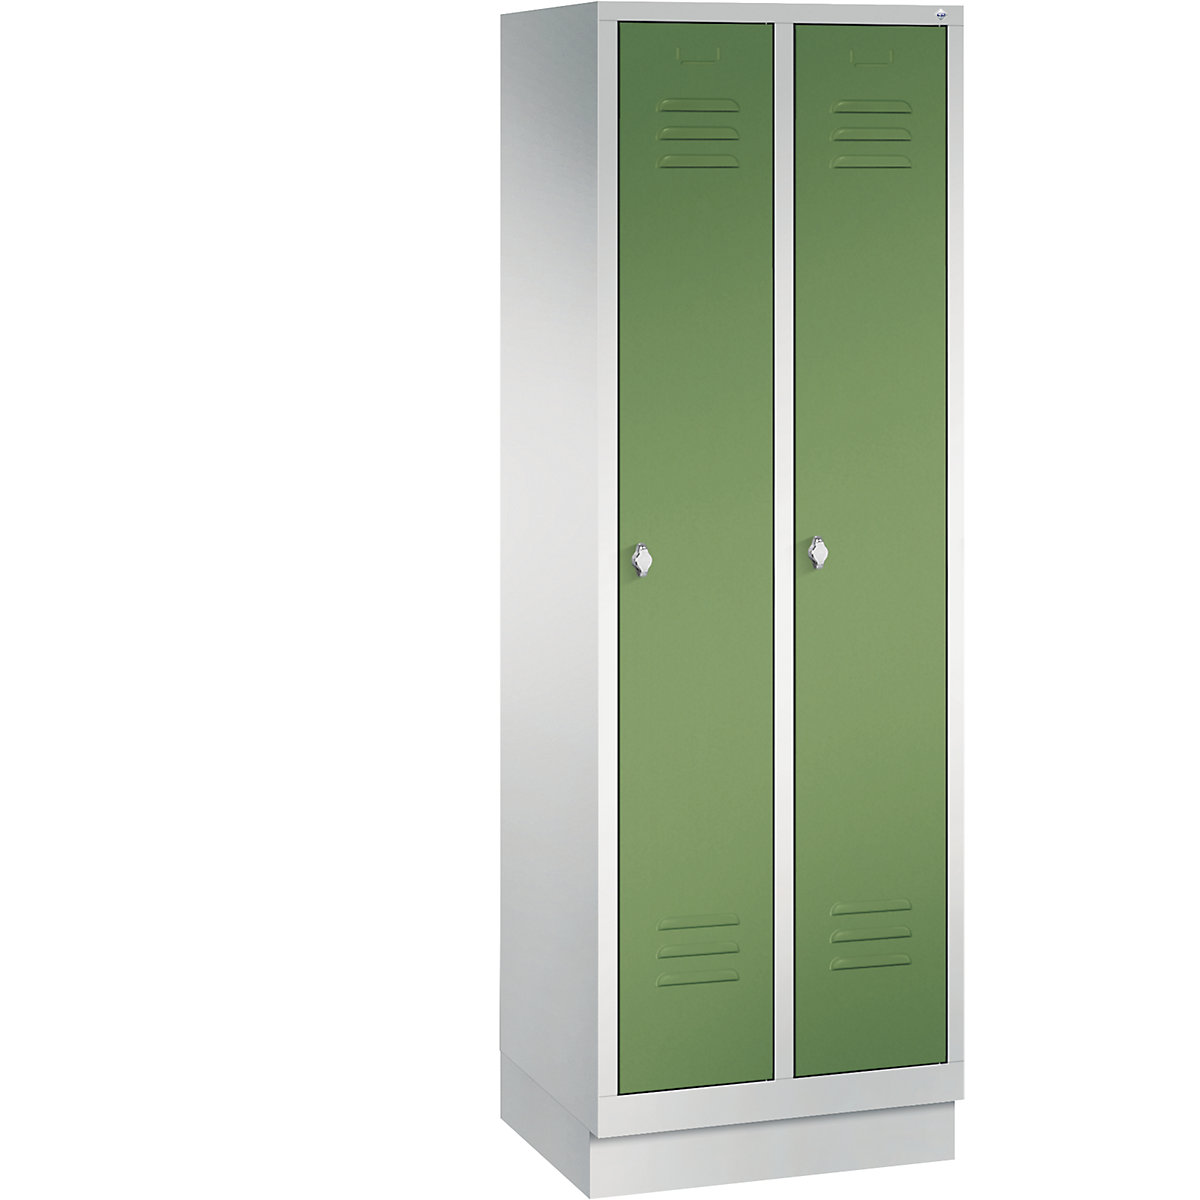 CLASSIC storage cupboard with plinth – C+P, 2 compartments, compartment width 300 mm, light grey / reseda green-11